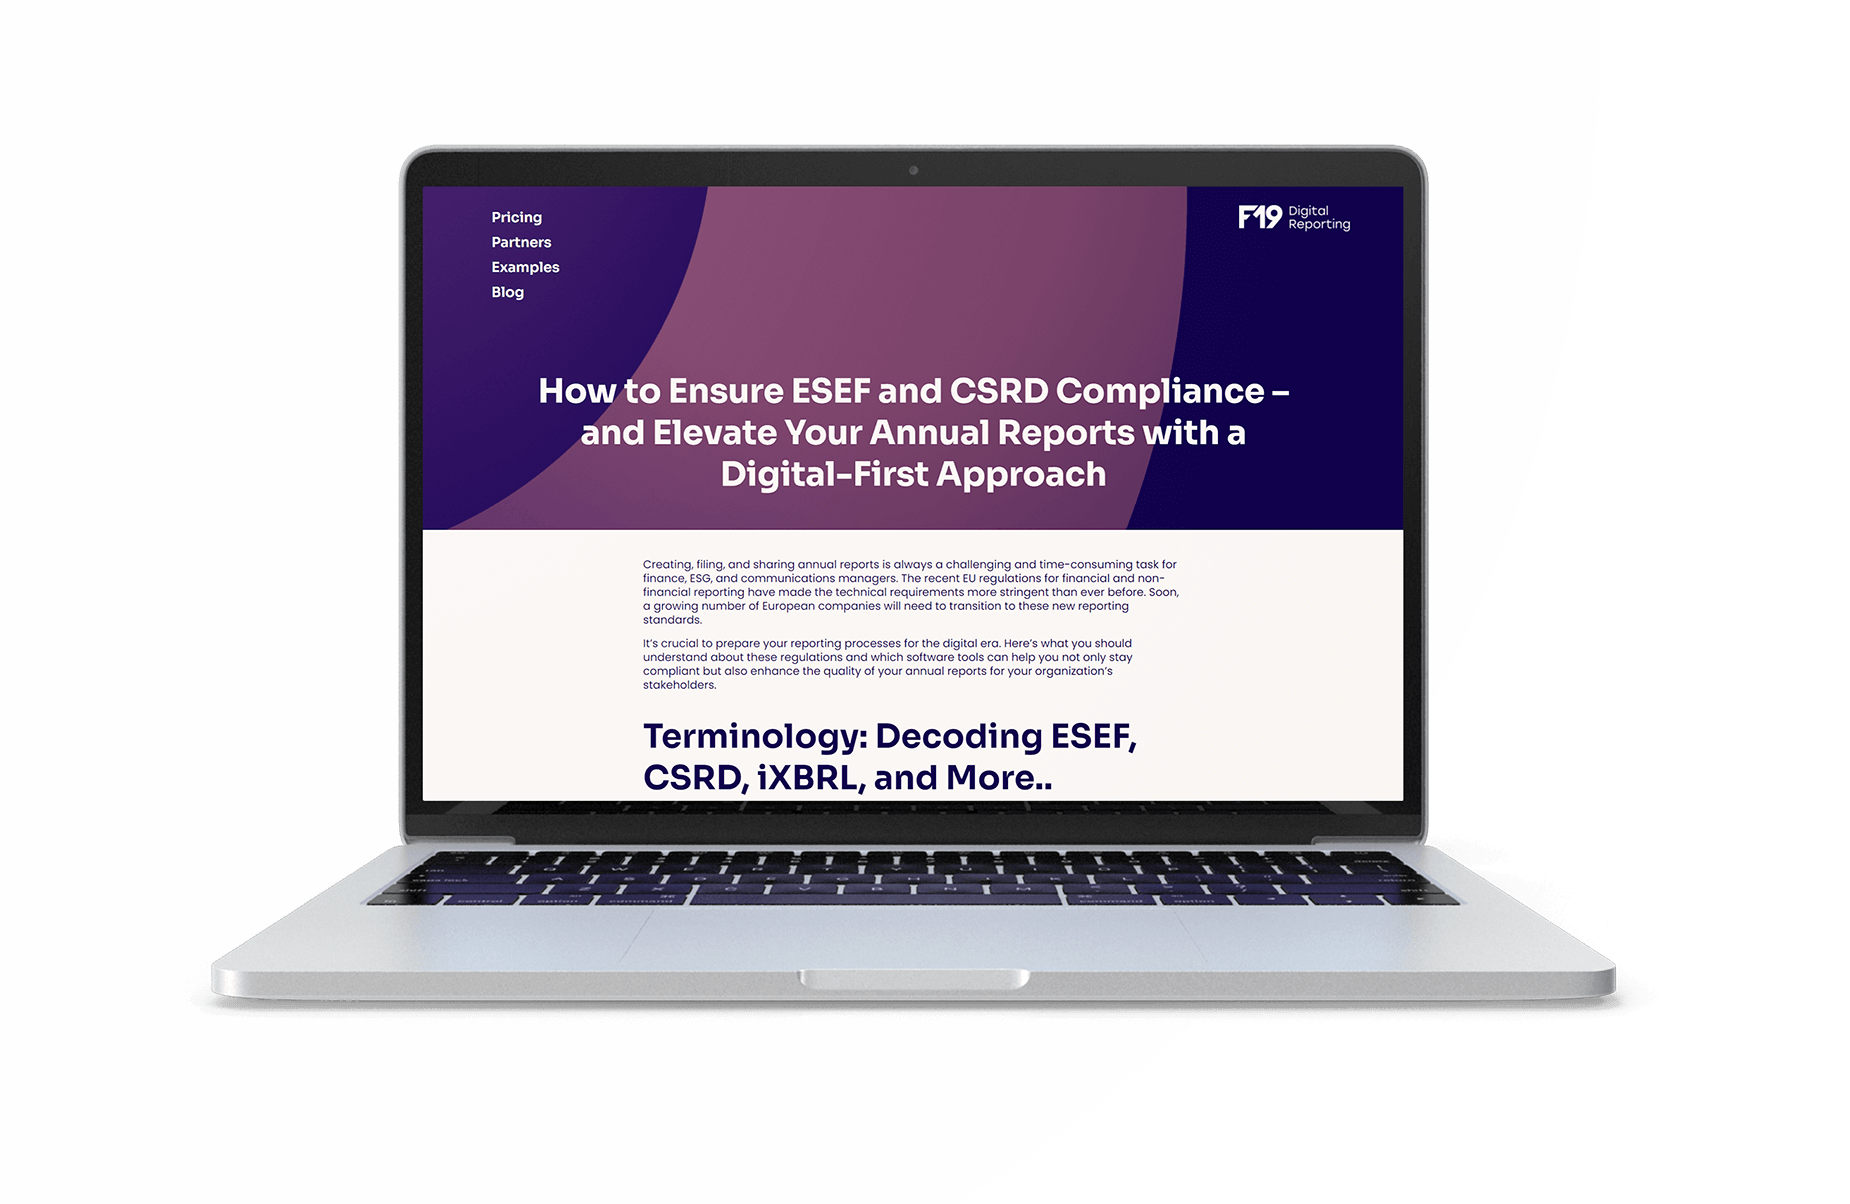 How to Ensure ESEF and CSRD Compliance – and Elevate Your Annual Reports with a Digital-First Approach